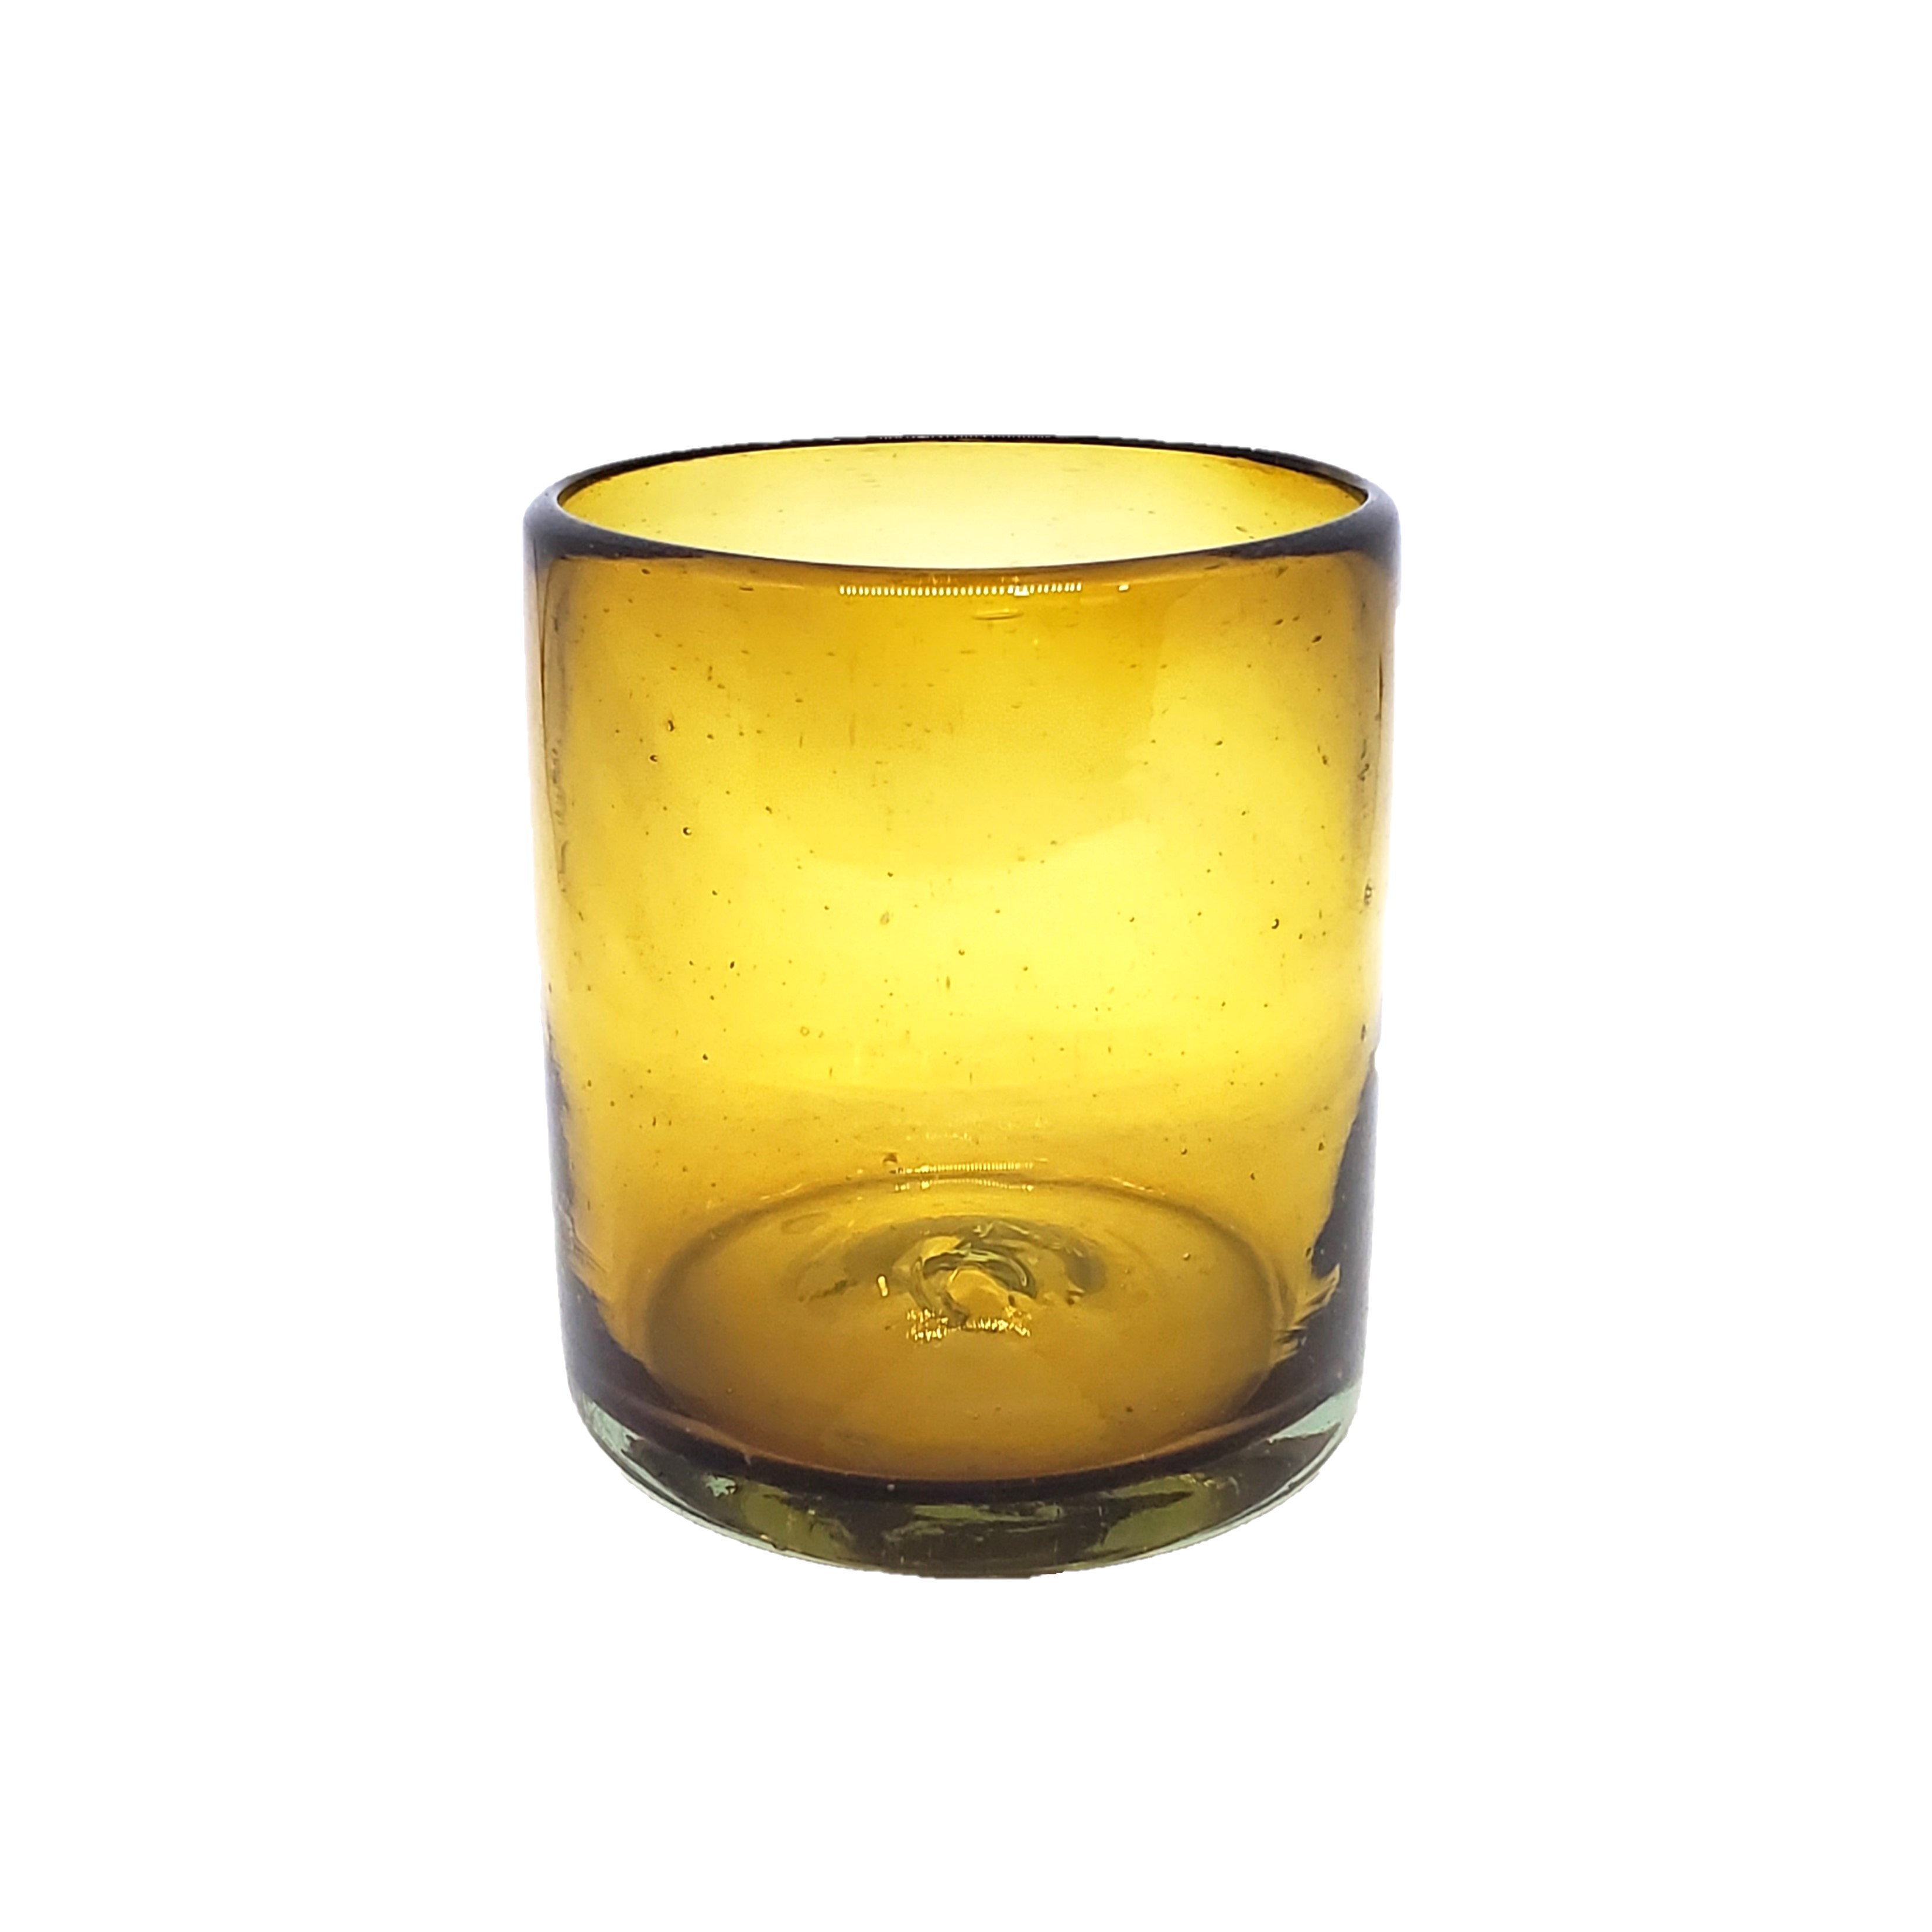 Mexican Glasses / Solid Amber 9 oz Short Tumblers (set of 6) / Enhance your favorite drink with these colorful handcrafted glasses.